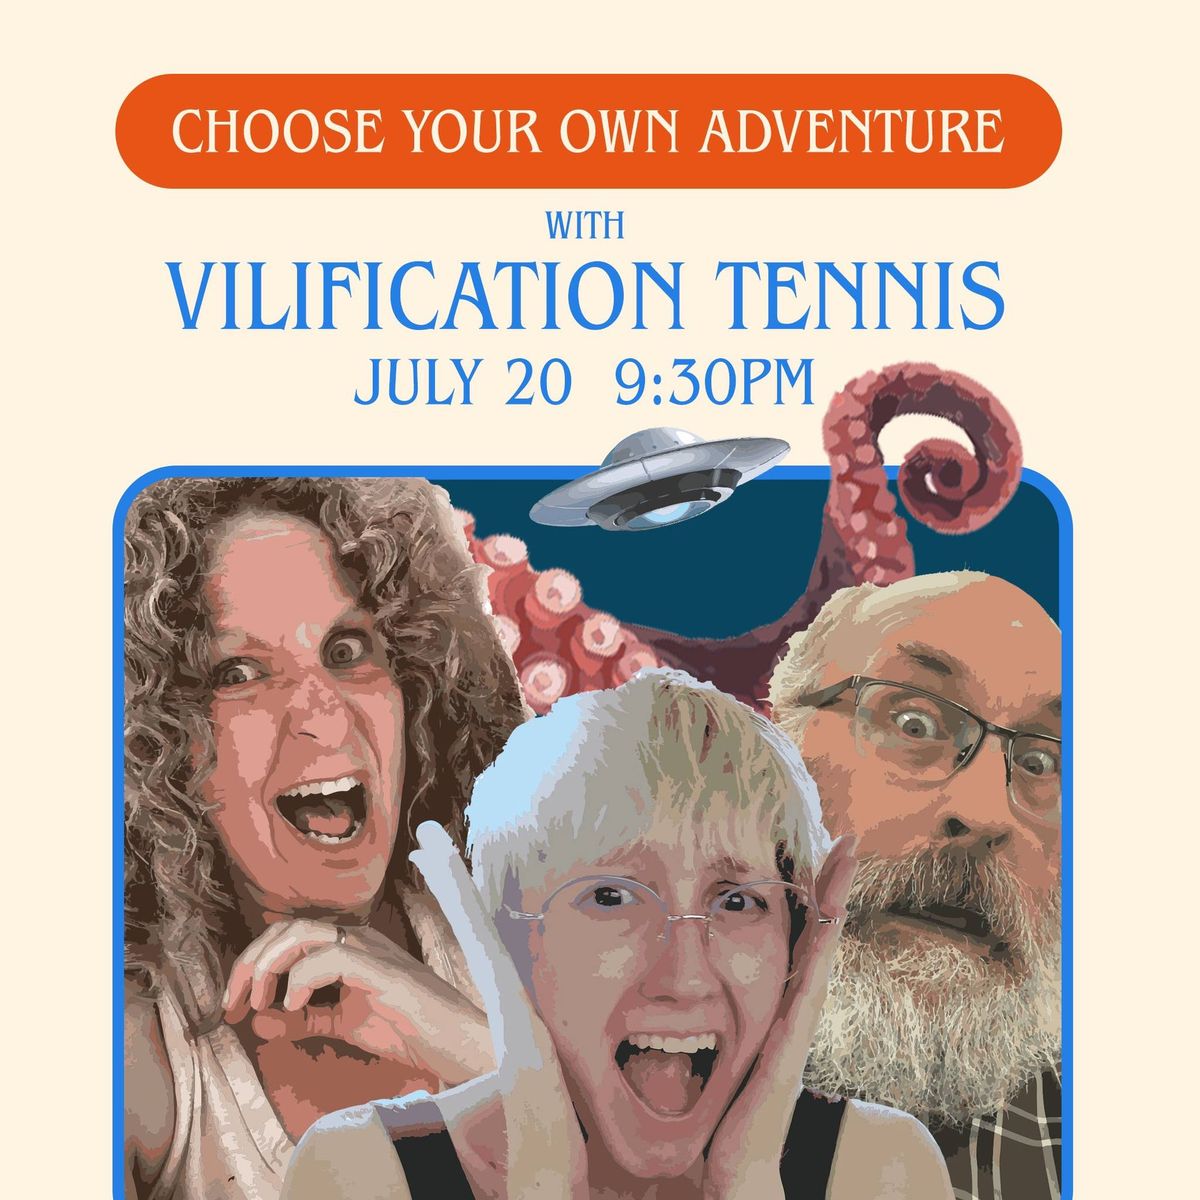 Choose Your Own Adventure with Vilification Tennis